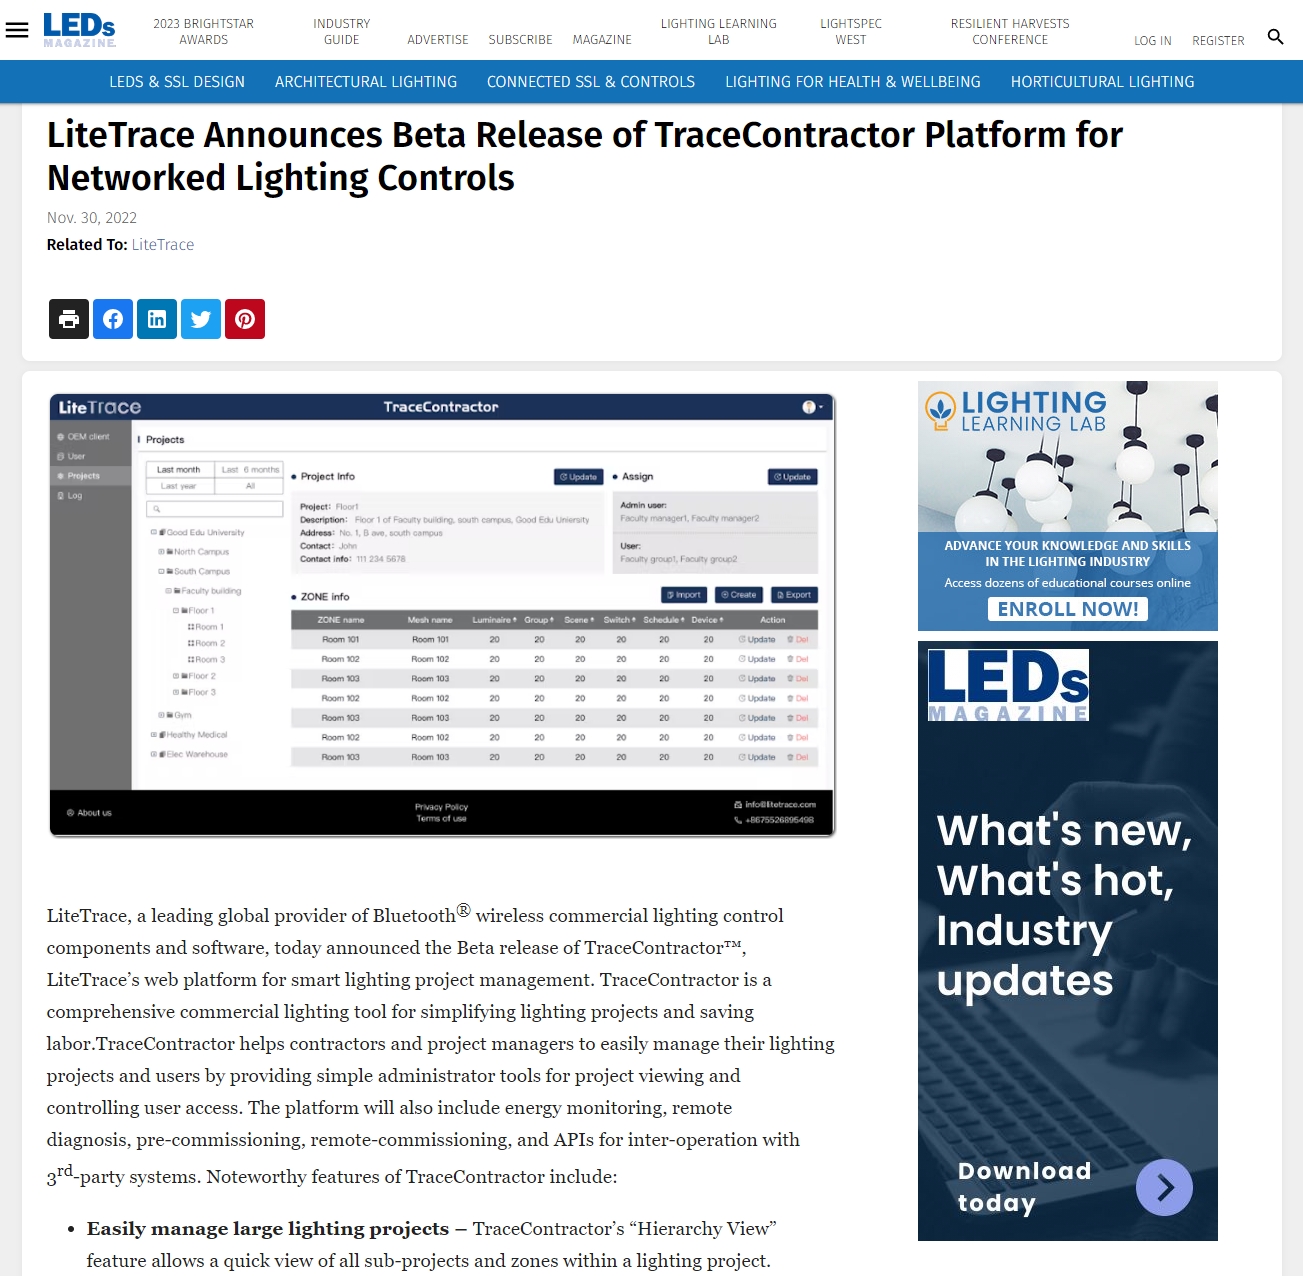 LiteTrace Announces Beta Release of TraceContractor Platform for Networked Lighting Controls